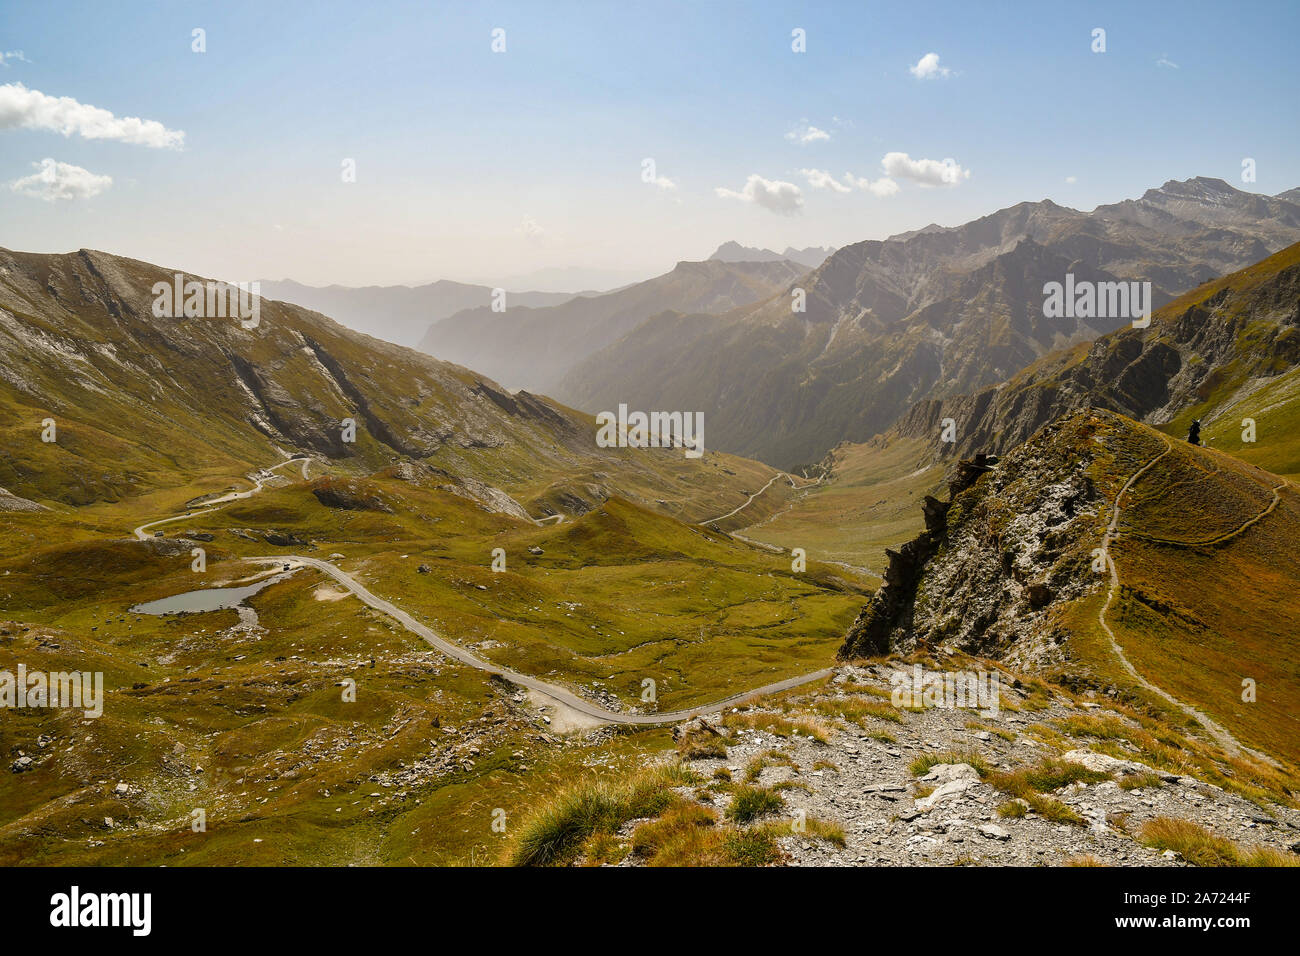 Elevated view of Colle dell'Agnello mountain pass with the winding road and the Lake of Pic d'Asti in late summer, Chianale, Cuneo, Piedmont, Italy Stock Photo